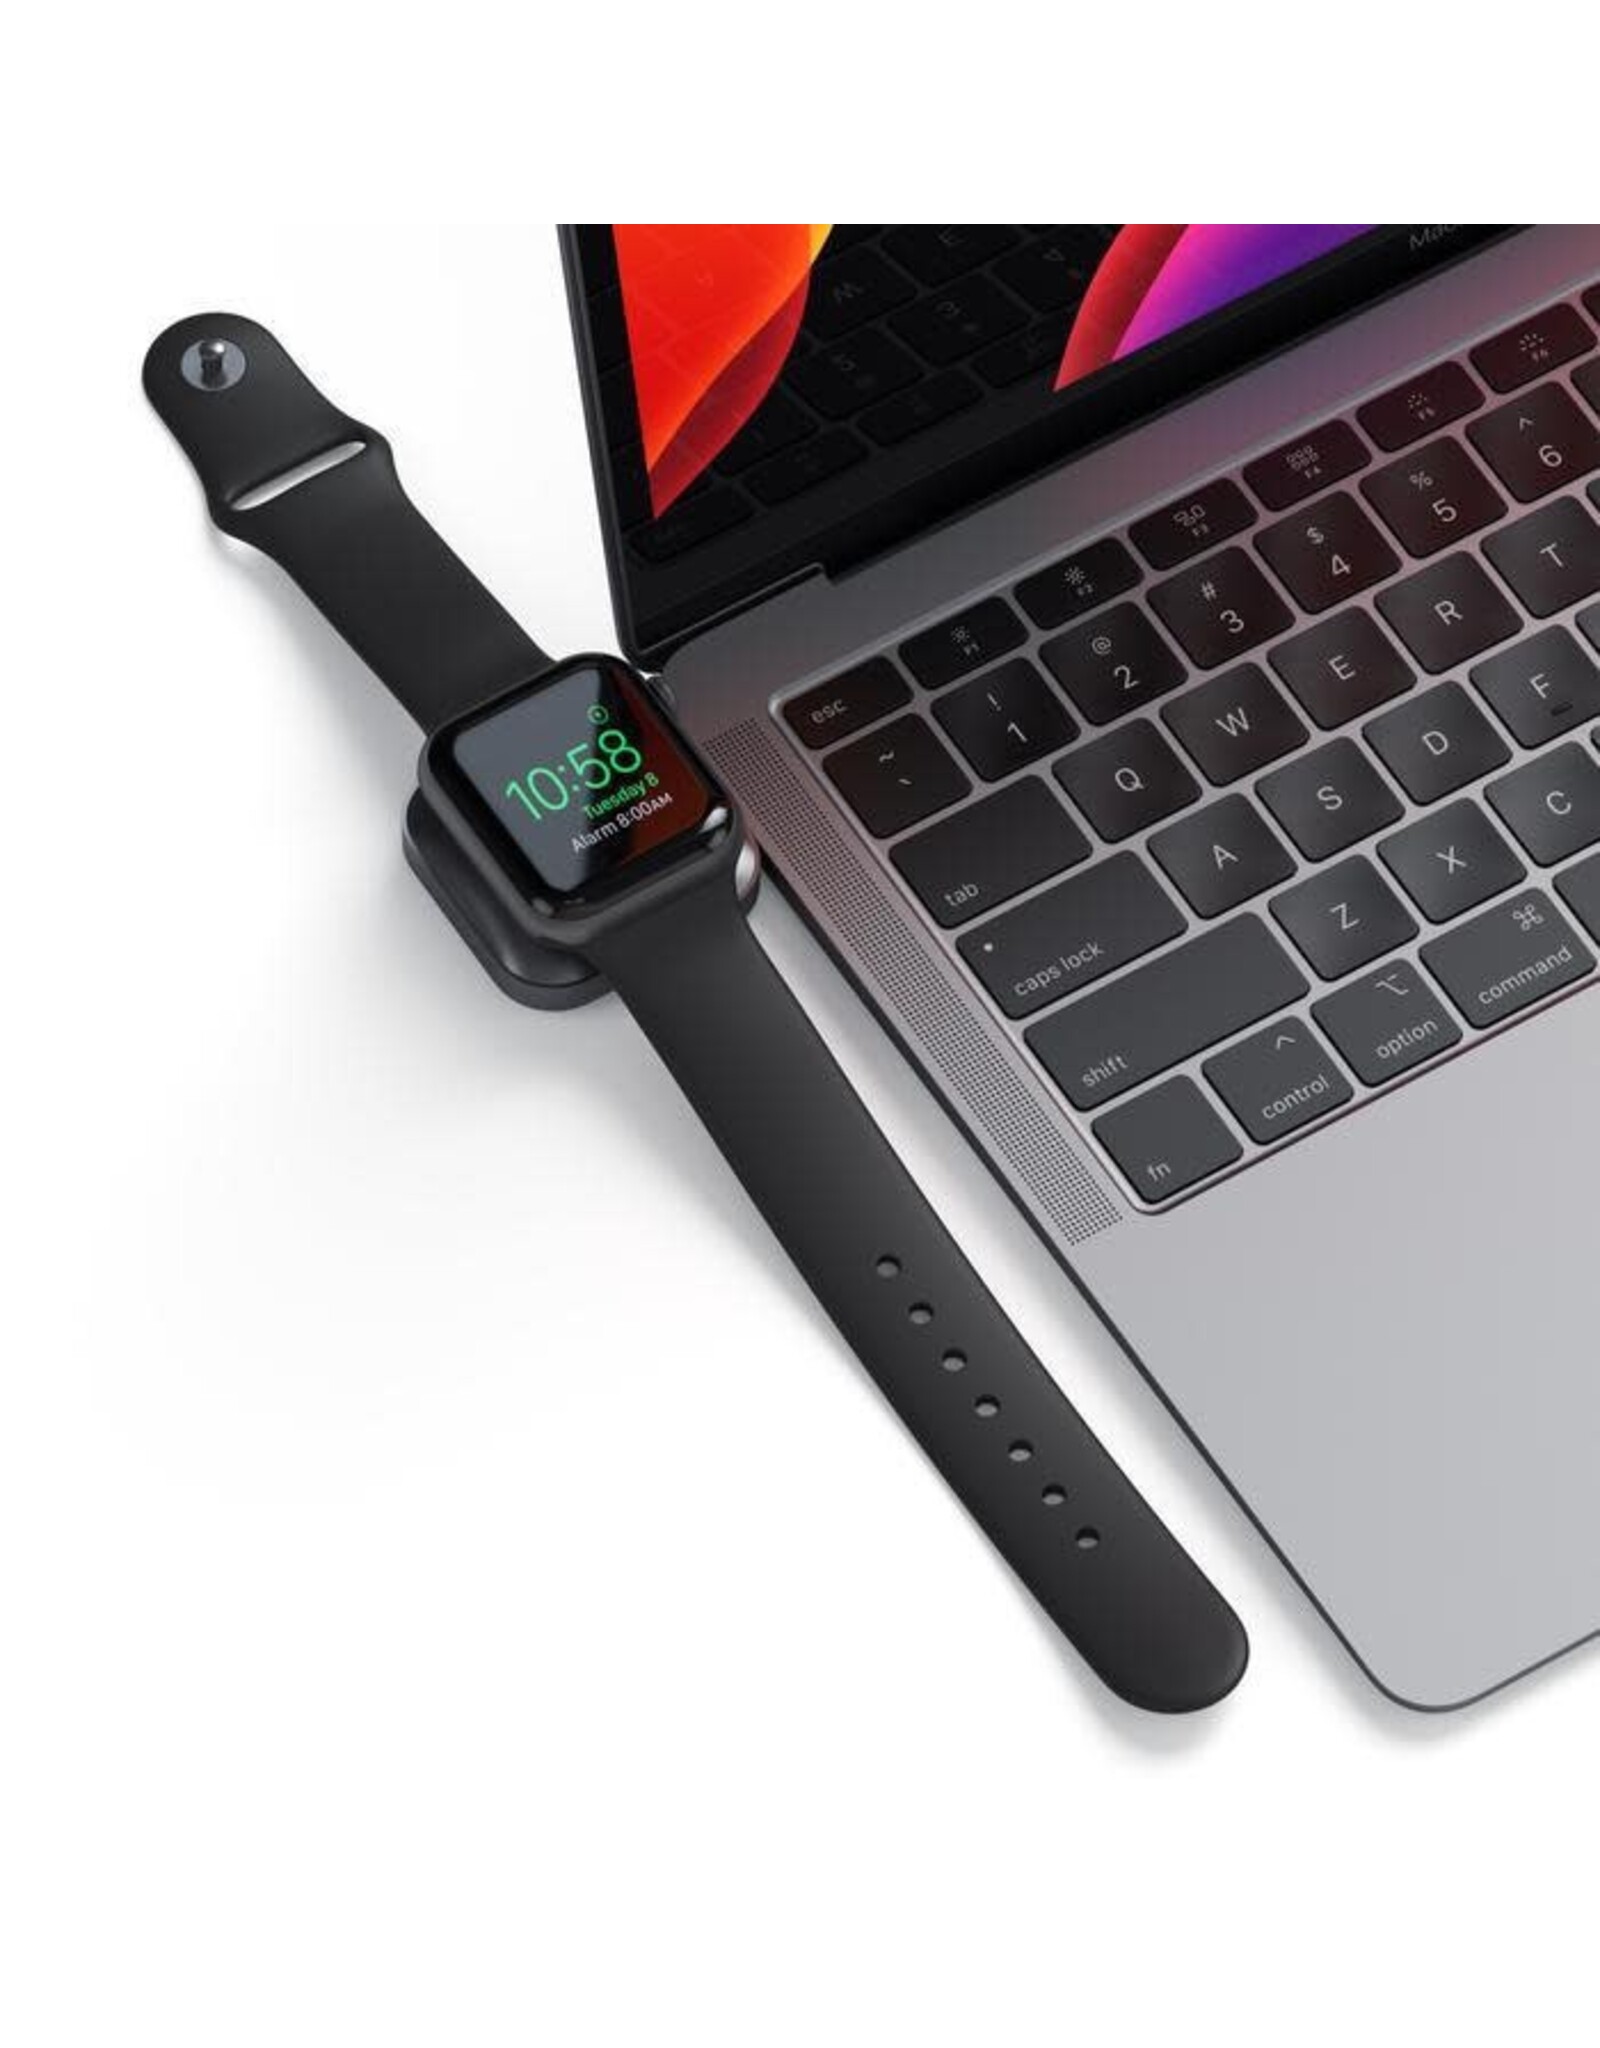 Satechi Satechi USB-C Magnetic Charging Dock for Apple Watch - Space Grey